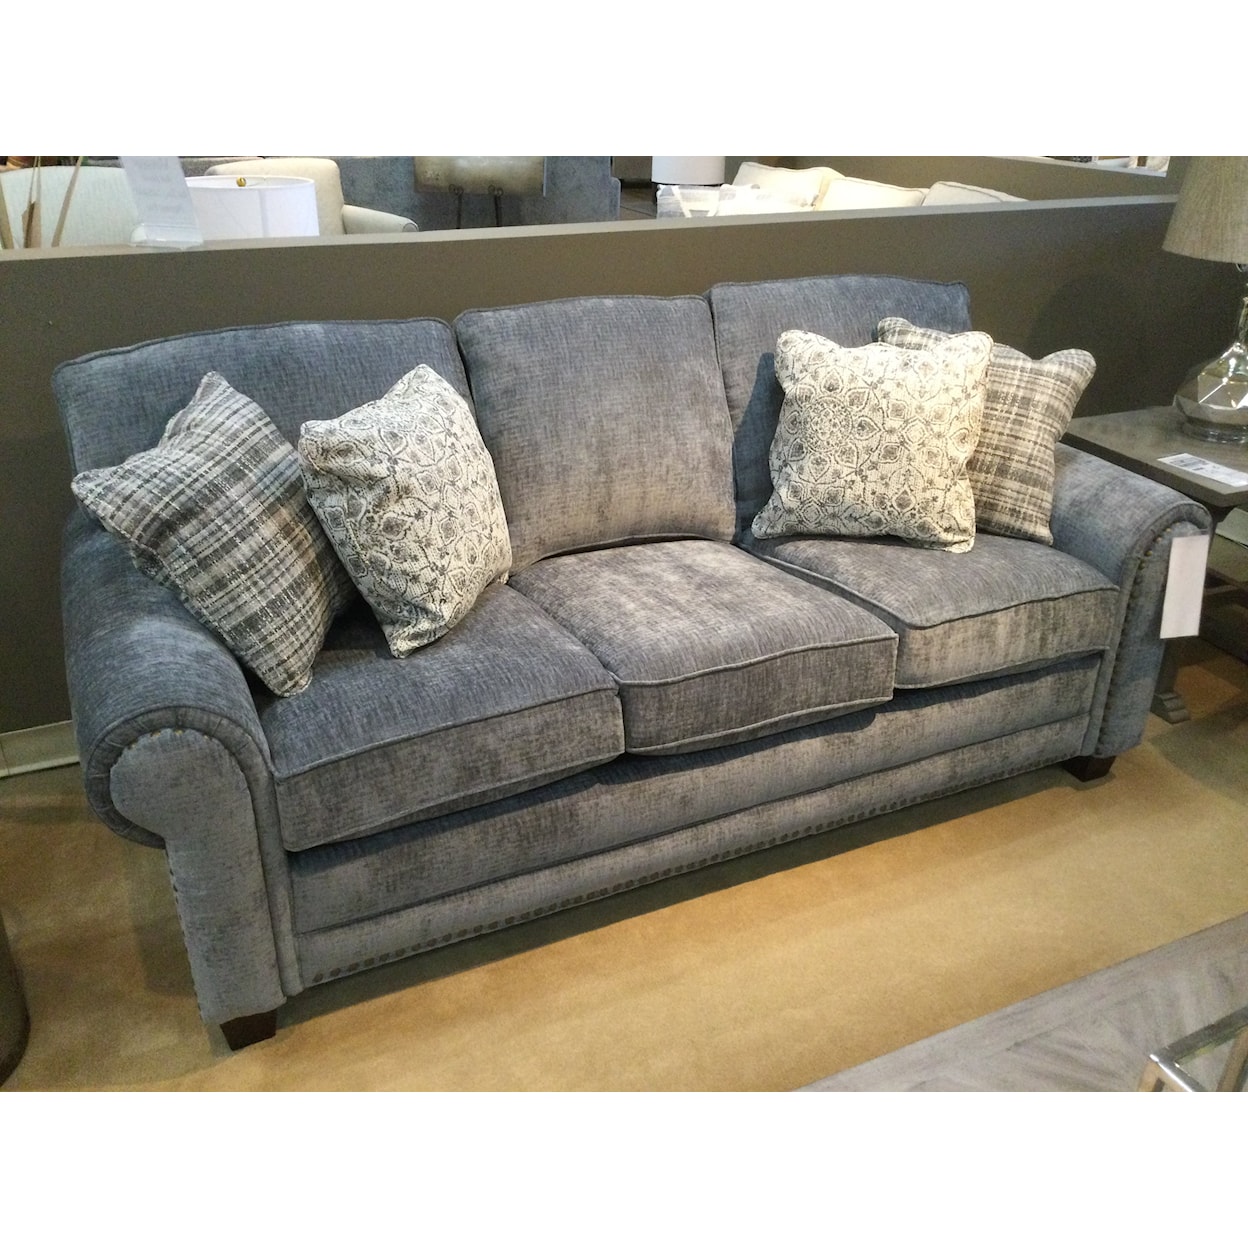 England 4250/N Series Silas Sofa with Nails